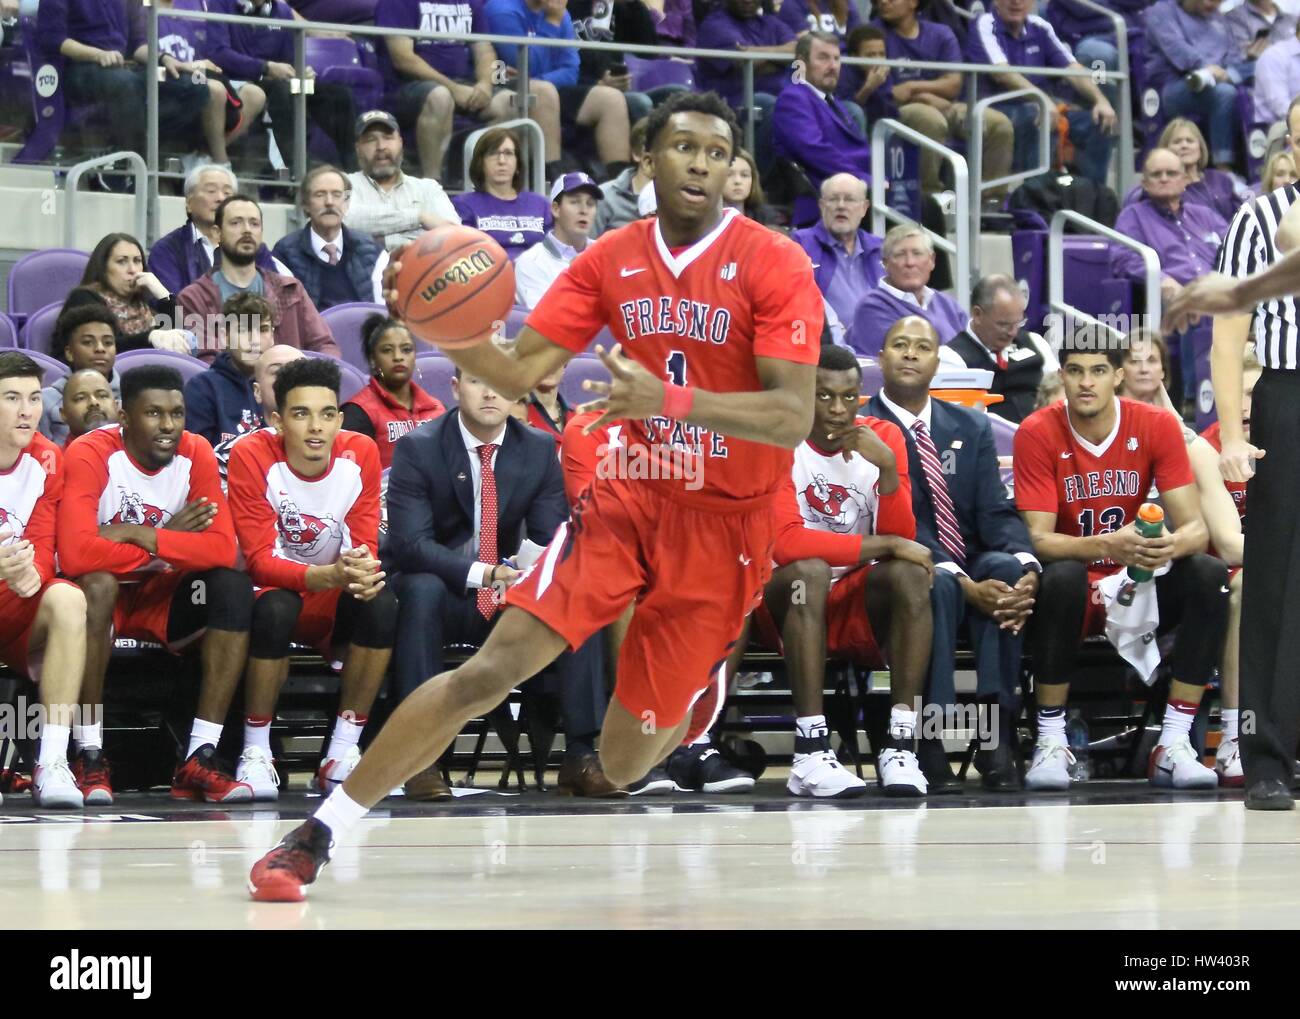 Fort Worth Texas, USA. 15th Mar, 2017. NIT basketball, tournament, NCAA, First Round, Bulldog guard Jaron Hopkins (1) makes big move to hoop during NCAA, NIT basketball tournament action between Fresno State Bulldogs and TCU Horned Frogs at Schollmaier Arena in Fort Worth Texas. TCU defeated Bulldogs 66-59. Jeff Goldberg/CSM/Alamy Live News Stock Photo